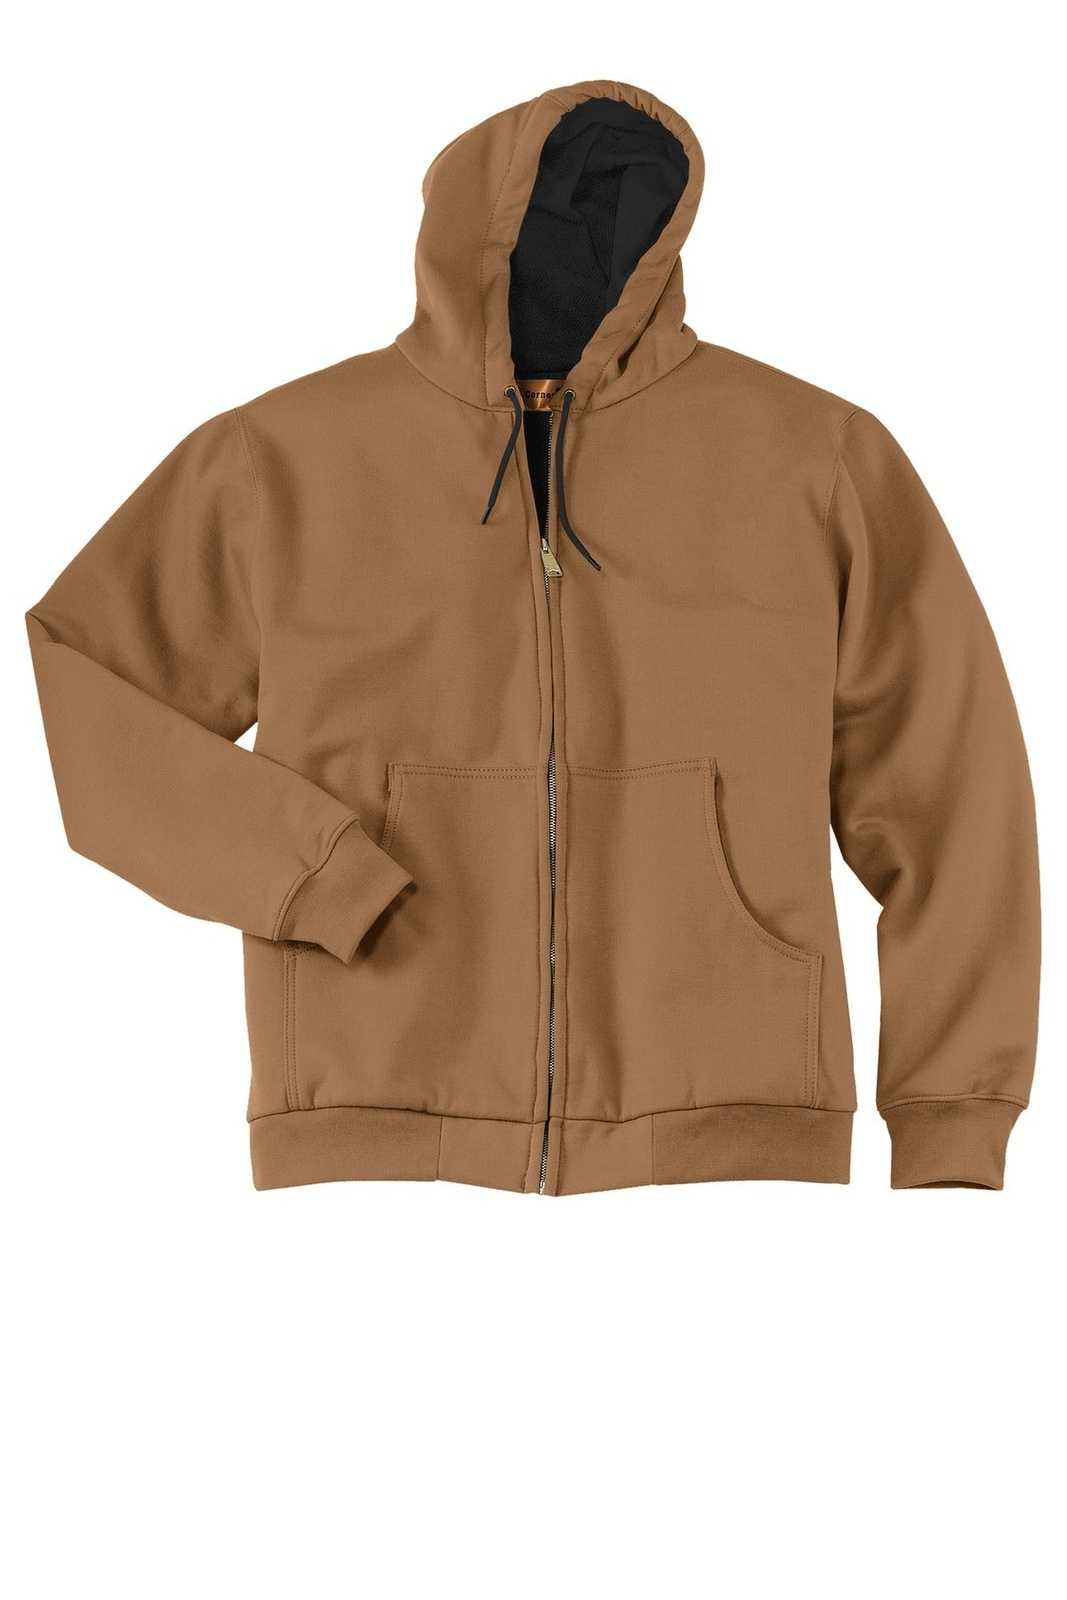 CornerStone CS620 Heavyweight Full-Zip Hooded Sweatshirt with Thermal Lining - Duck Brown - HIT a Double - 5